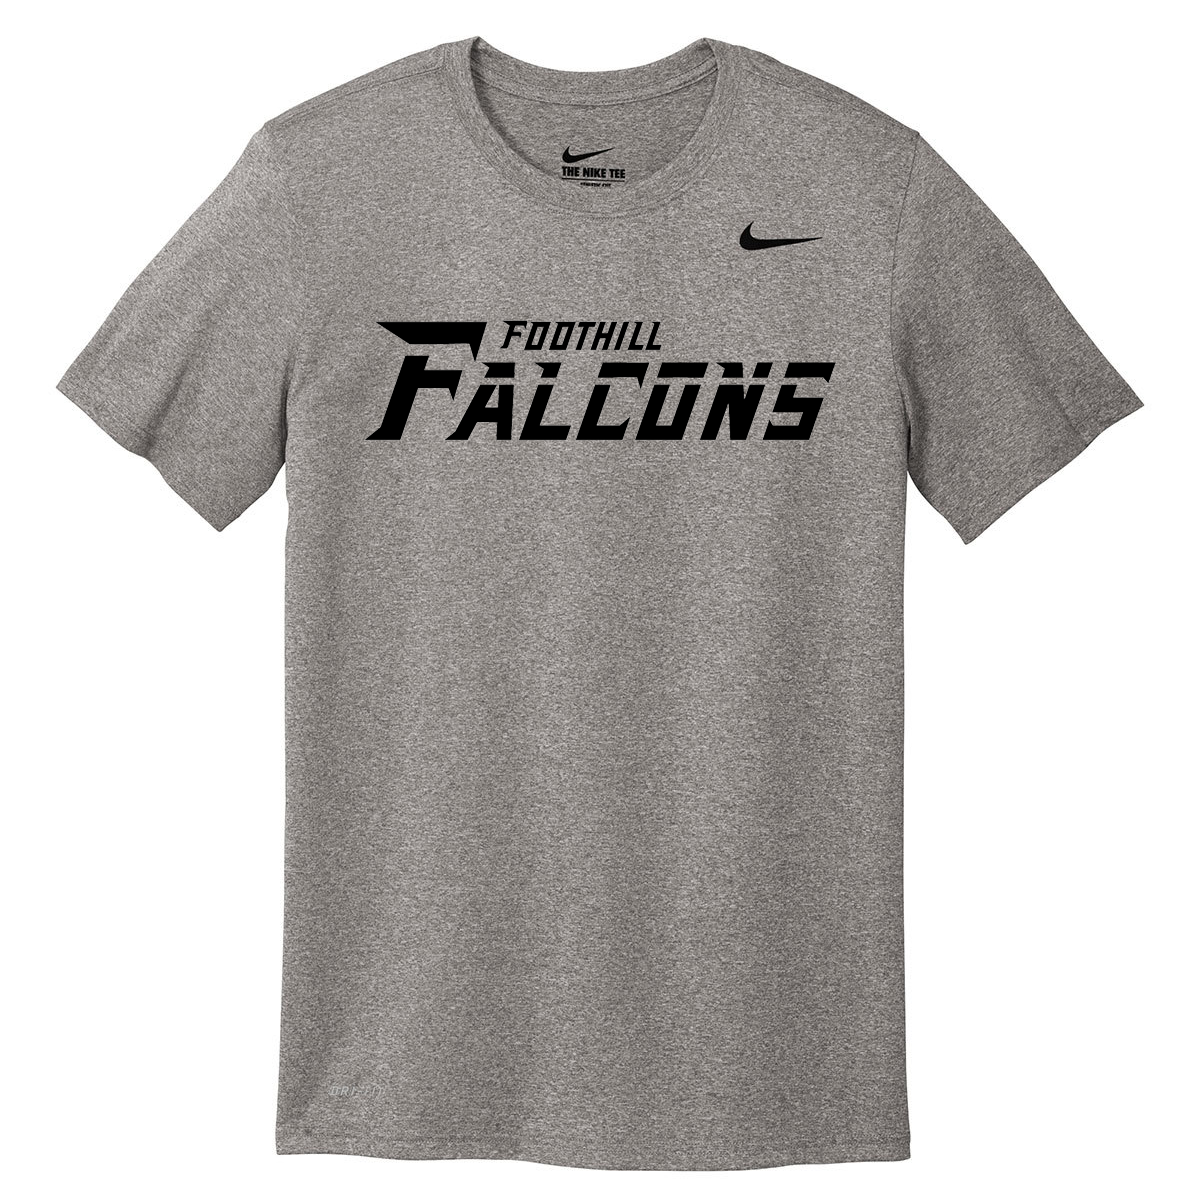 Foothill Falcons Nike rLegend Tee